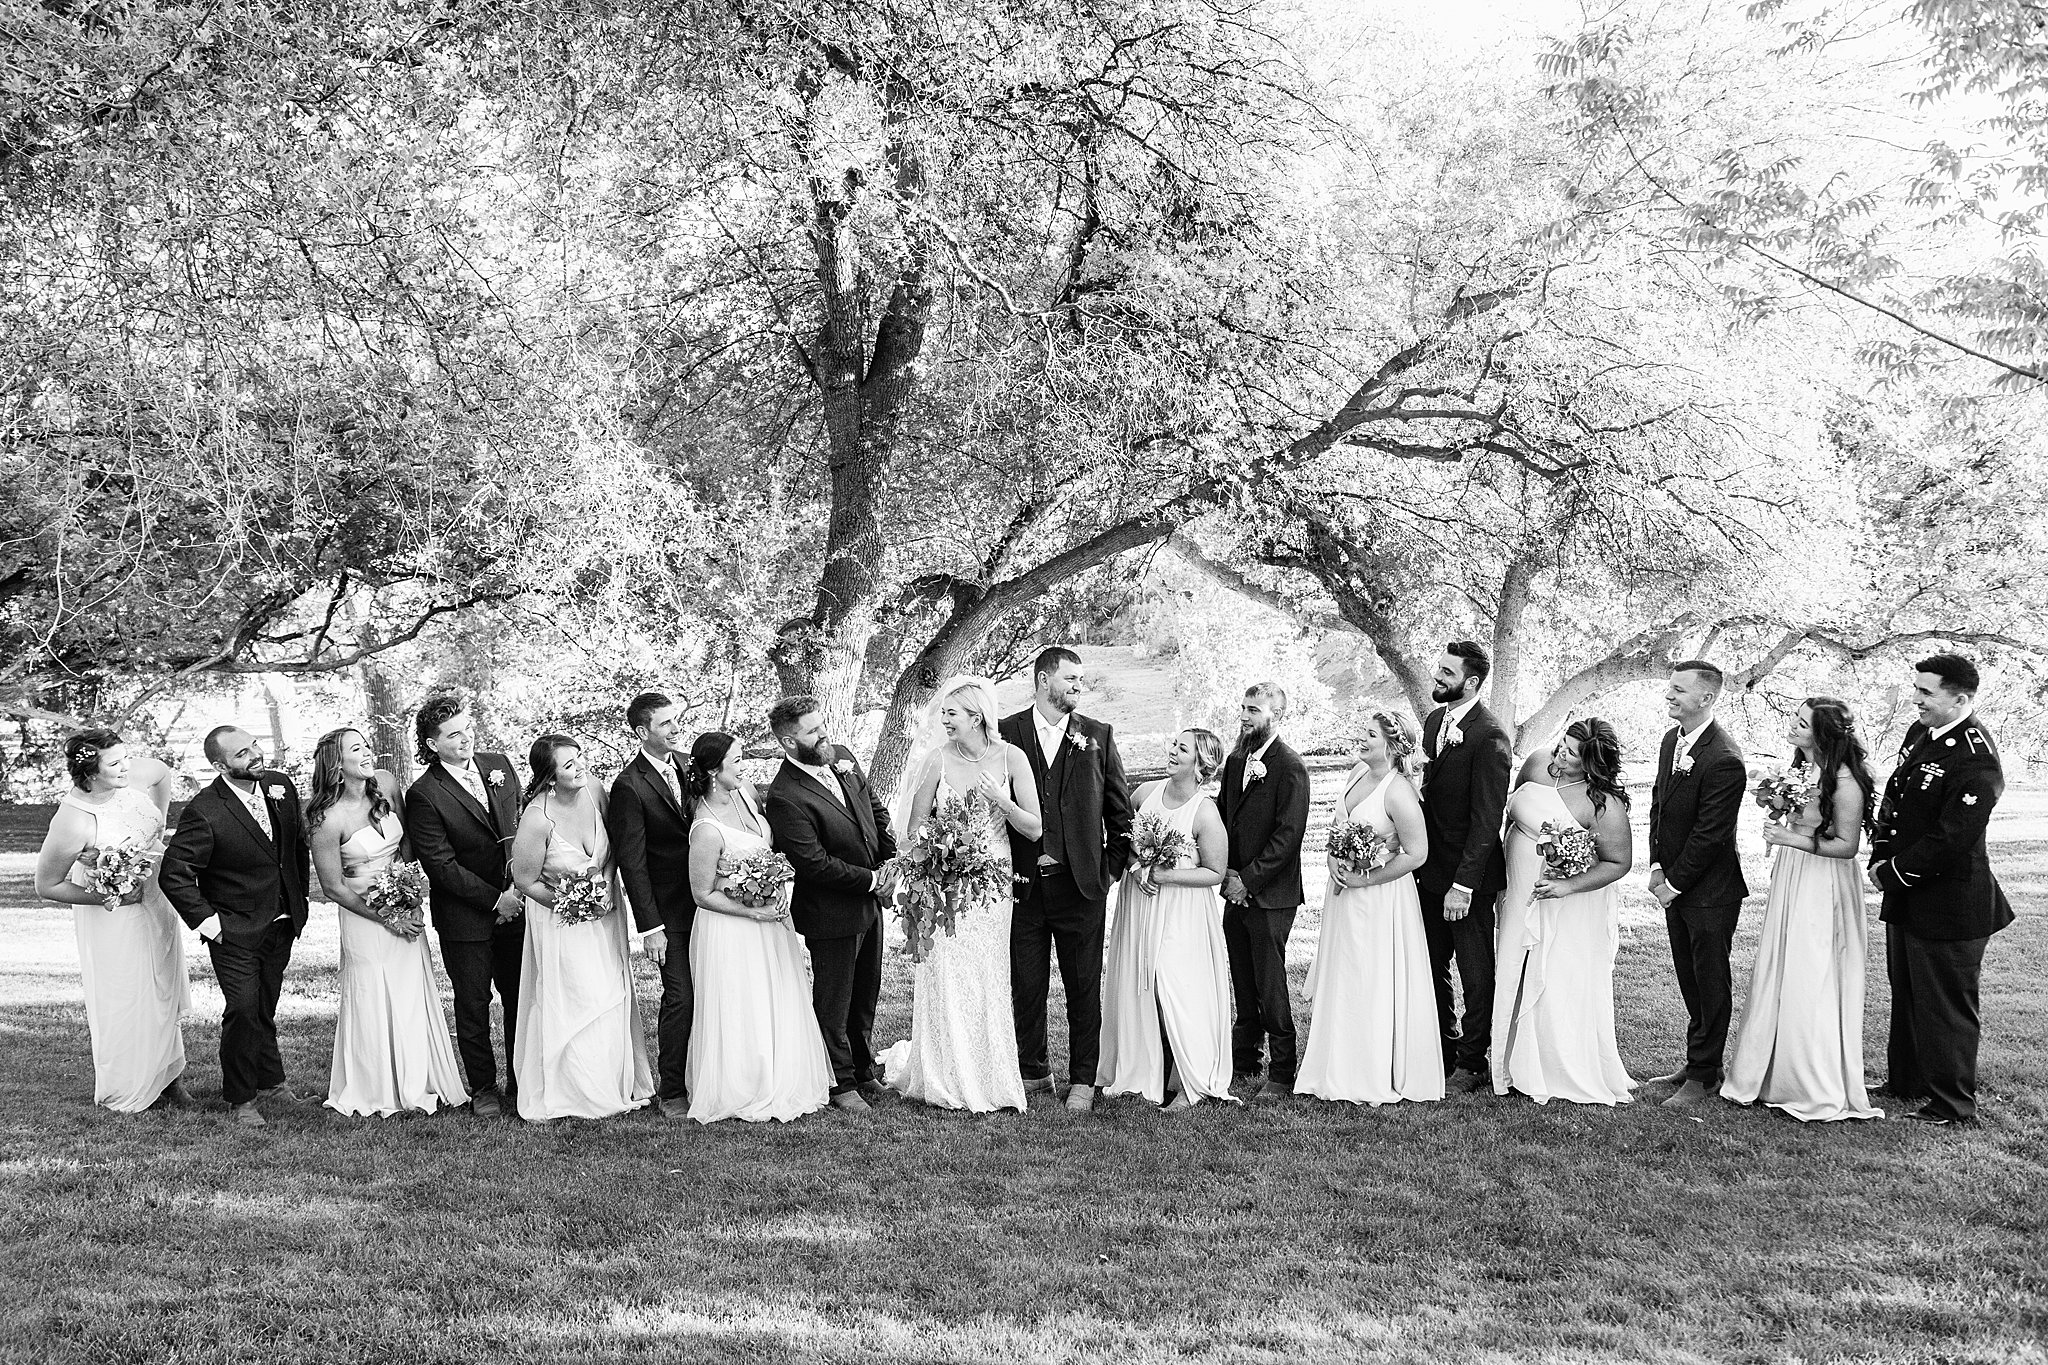 Bridal party laughing together at Van Dickson Ranch wedding by Skull Valley wedding photographer PMA Photography.